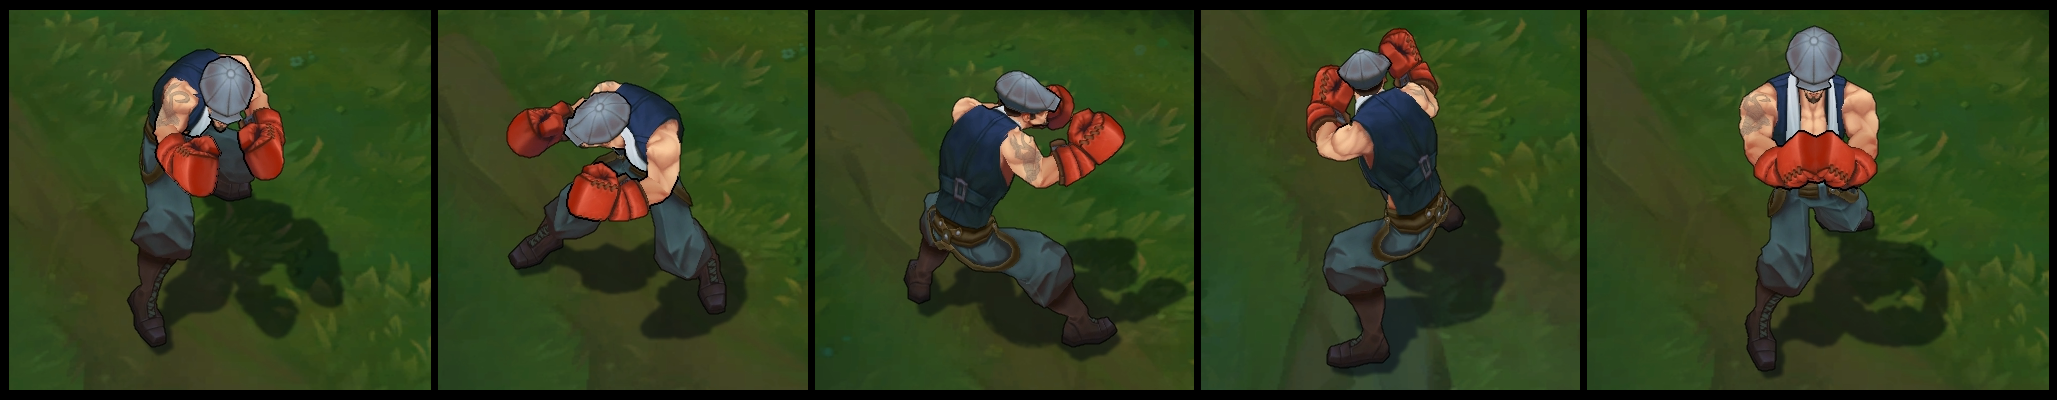 Knockout Lee Sin Poses